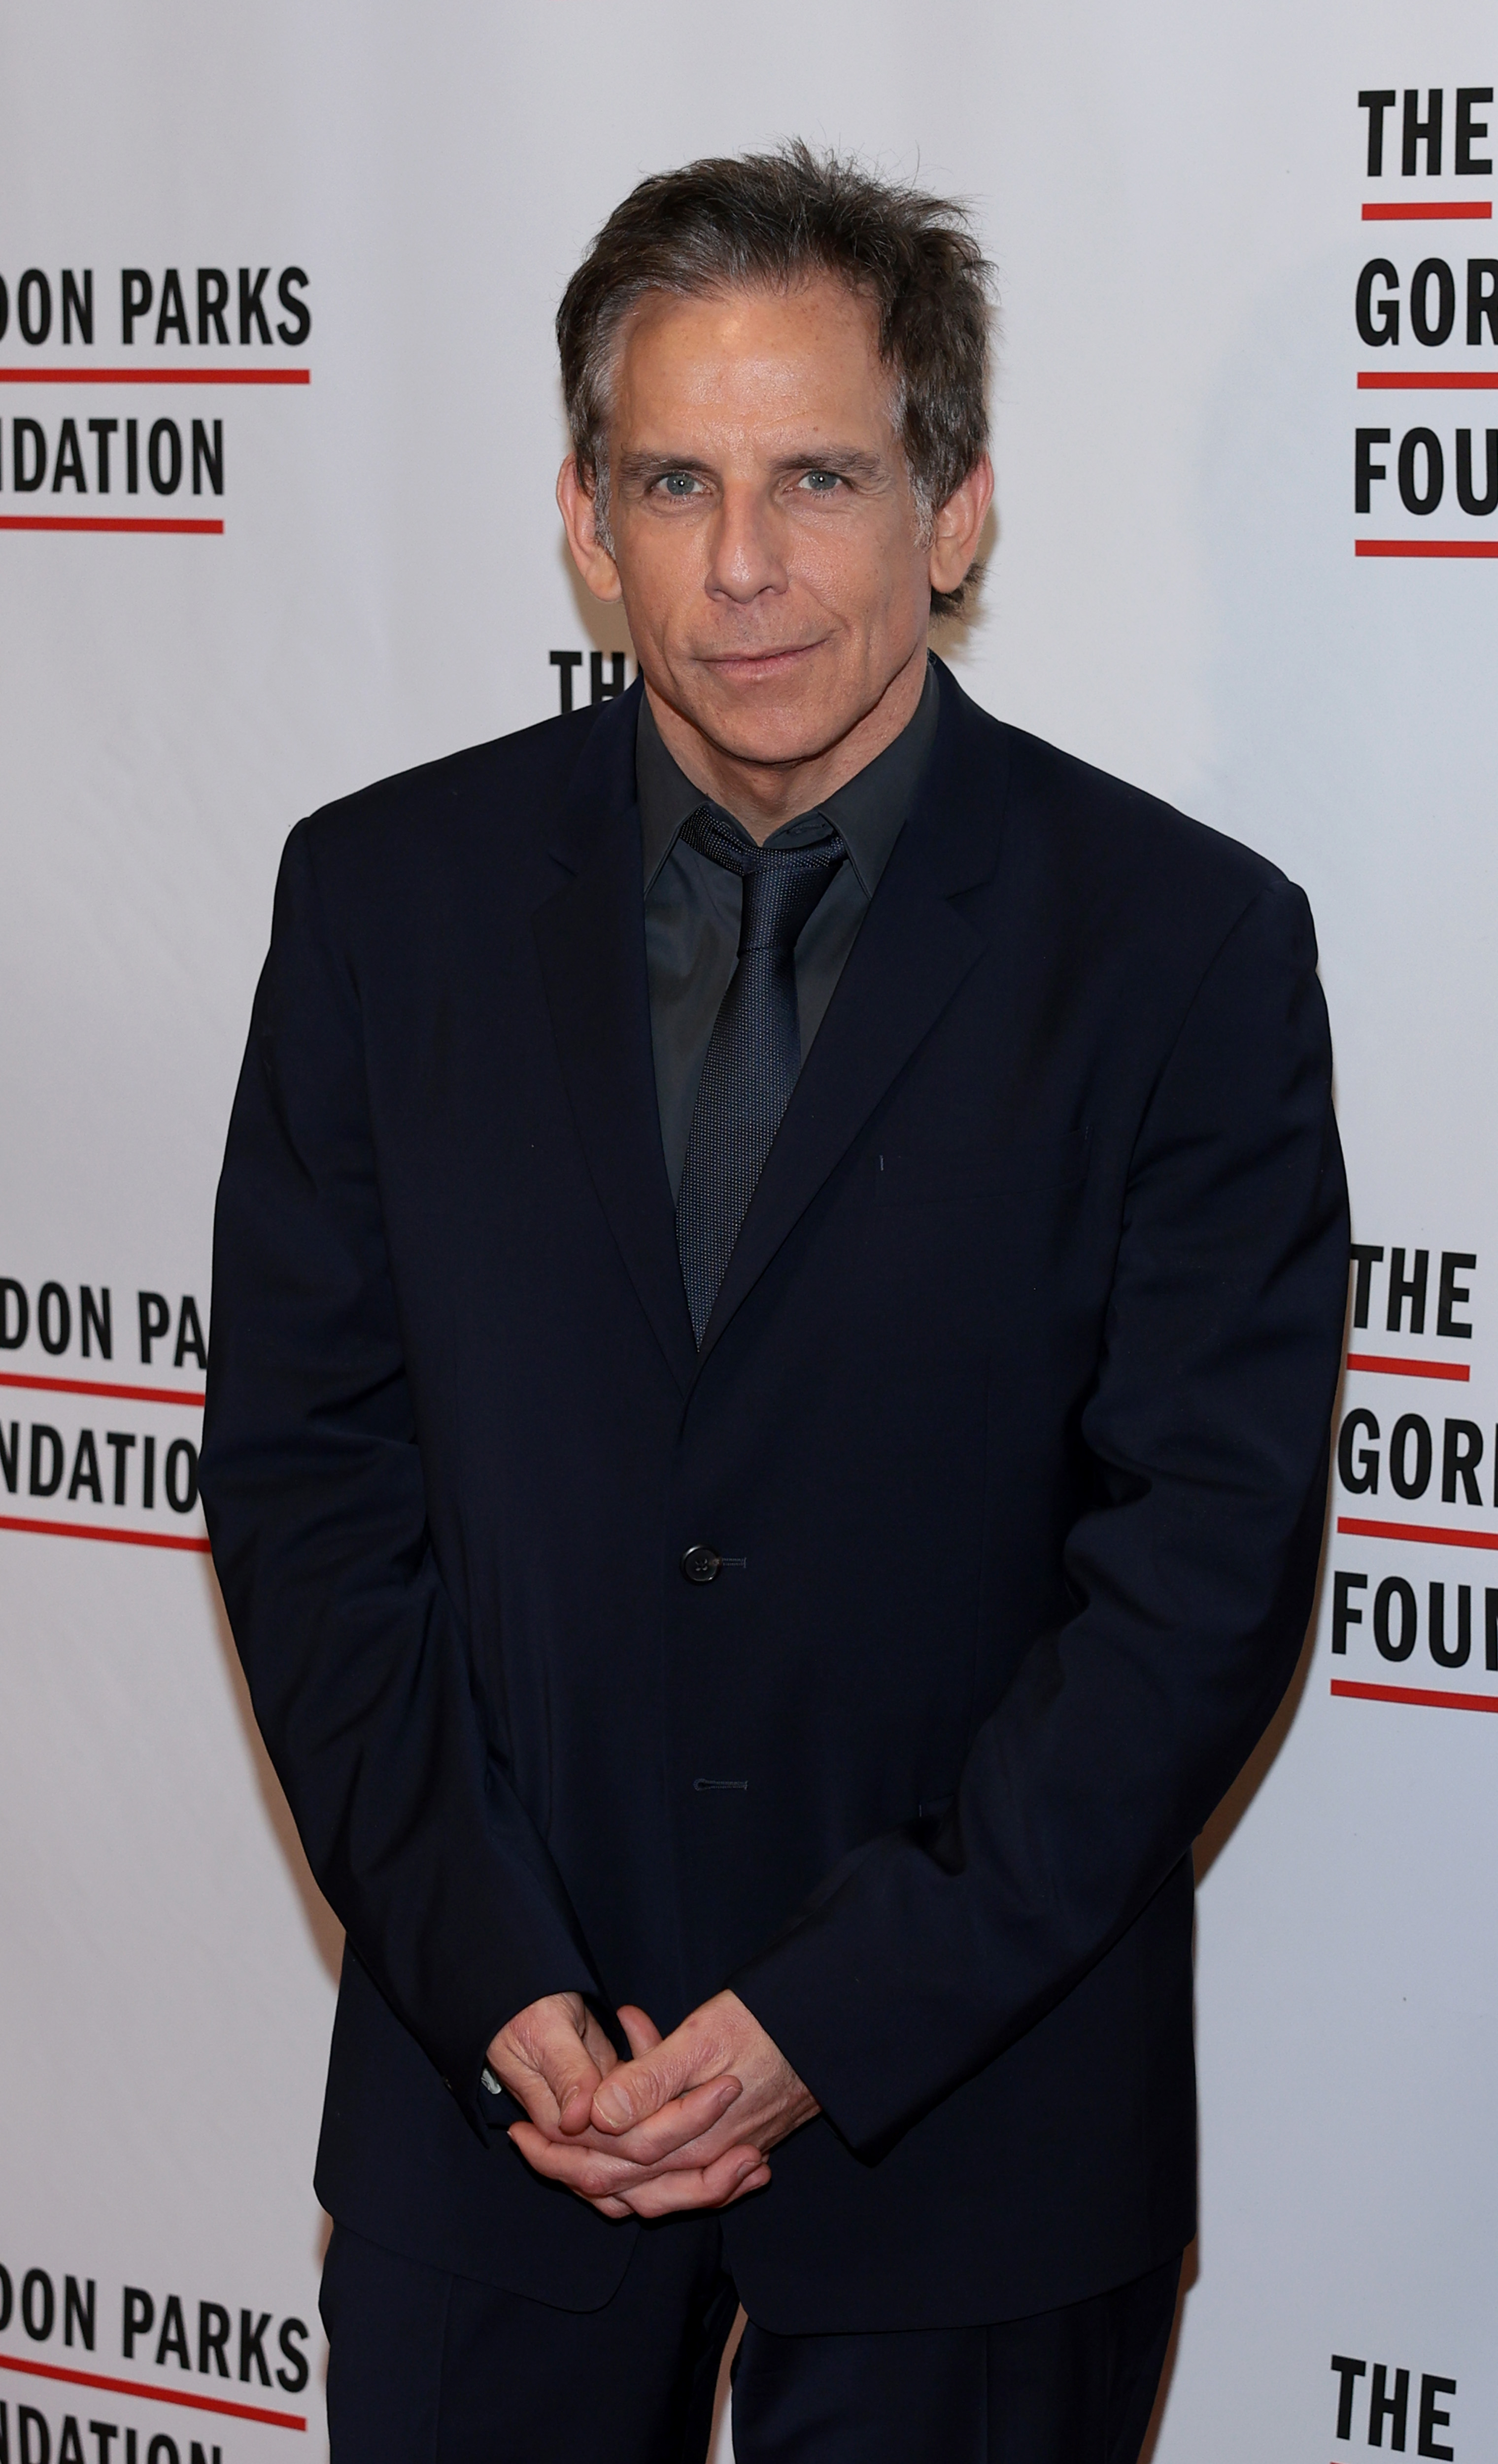 Ben Stiller at The Gordon Parks Foundation event, dressed in a dark suit and tie, posing in front of a step-and-repeat banner